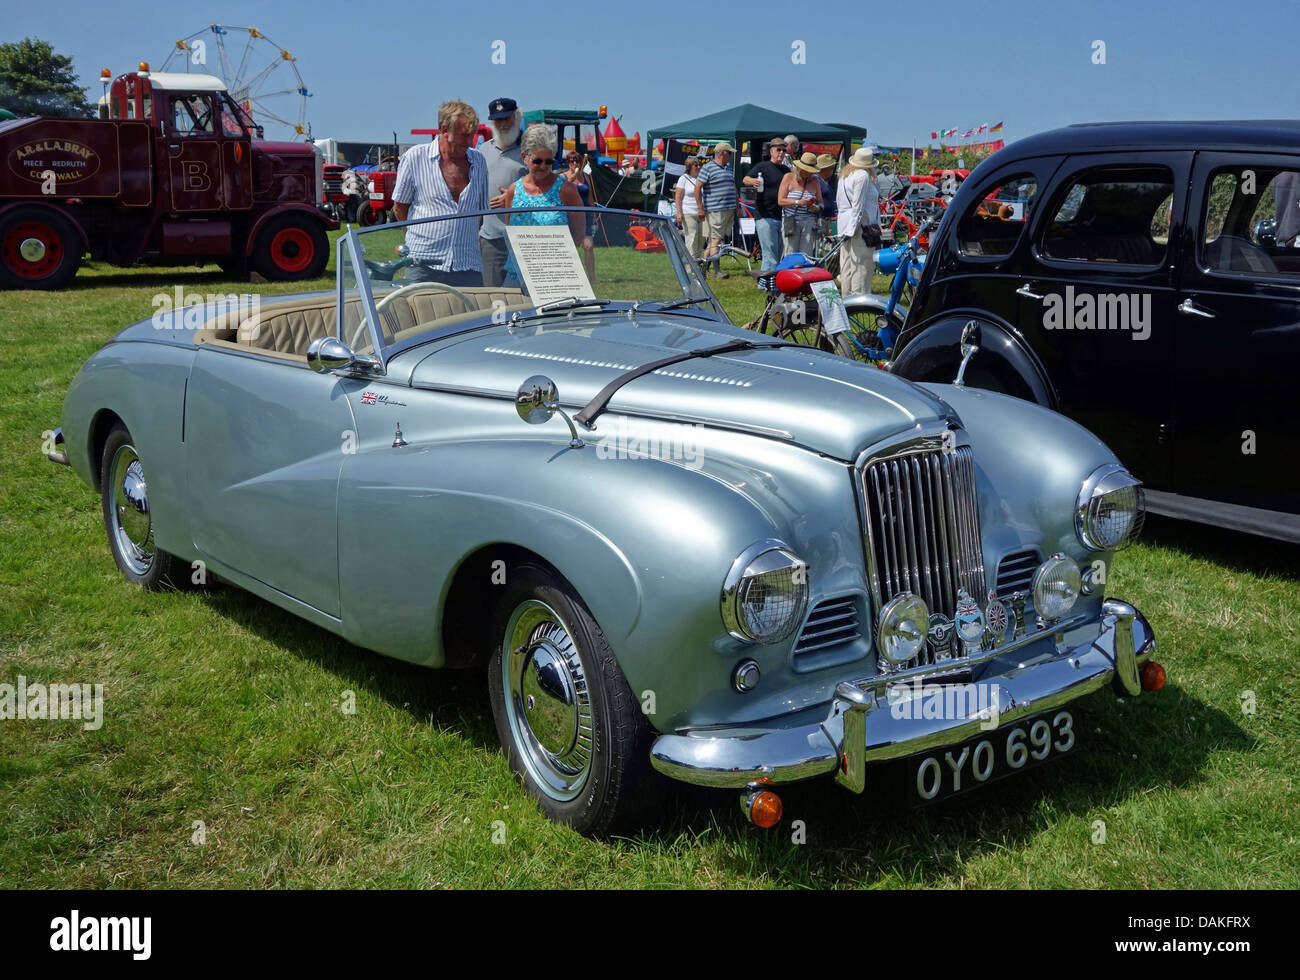 A 1954 mk1 Sunbeam Alpine at a country fair in Cornwall, UK Stock Photo